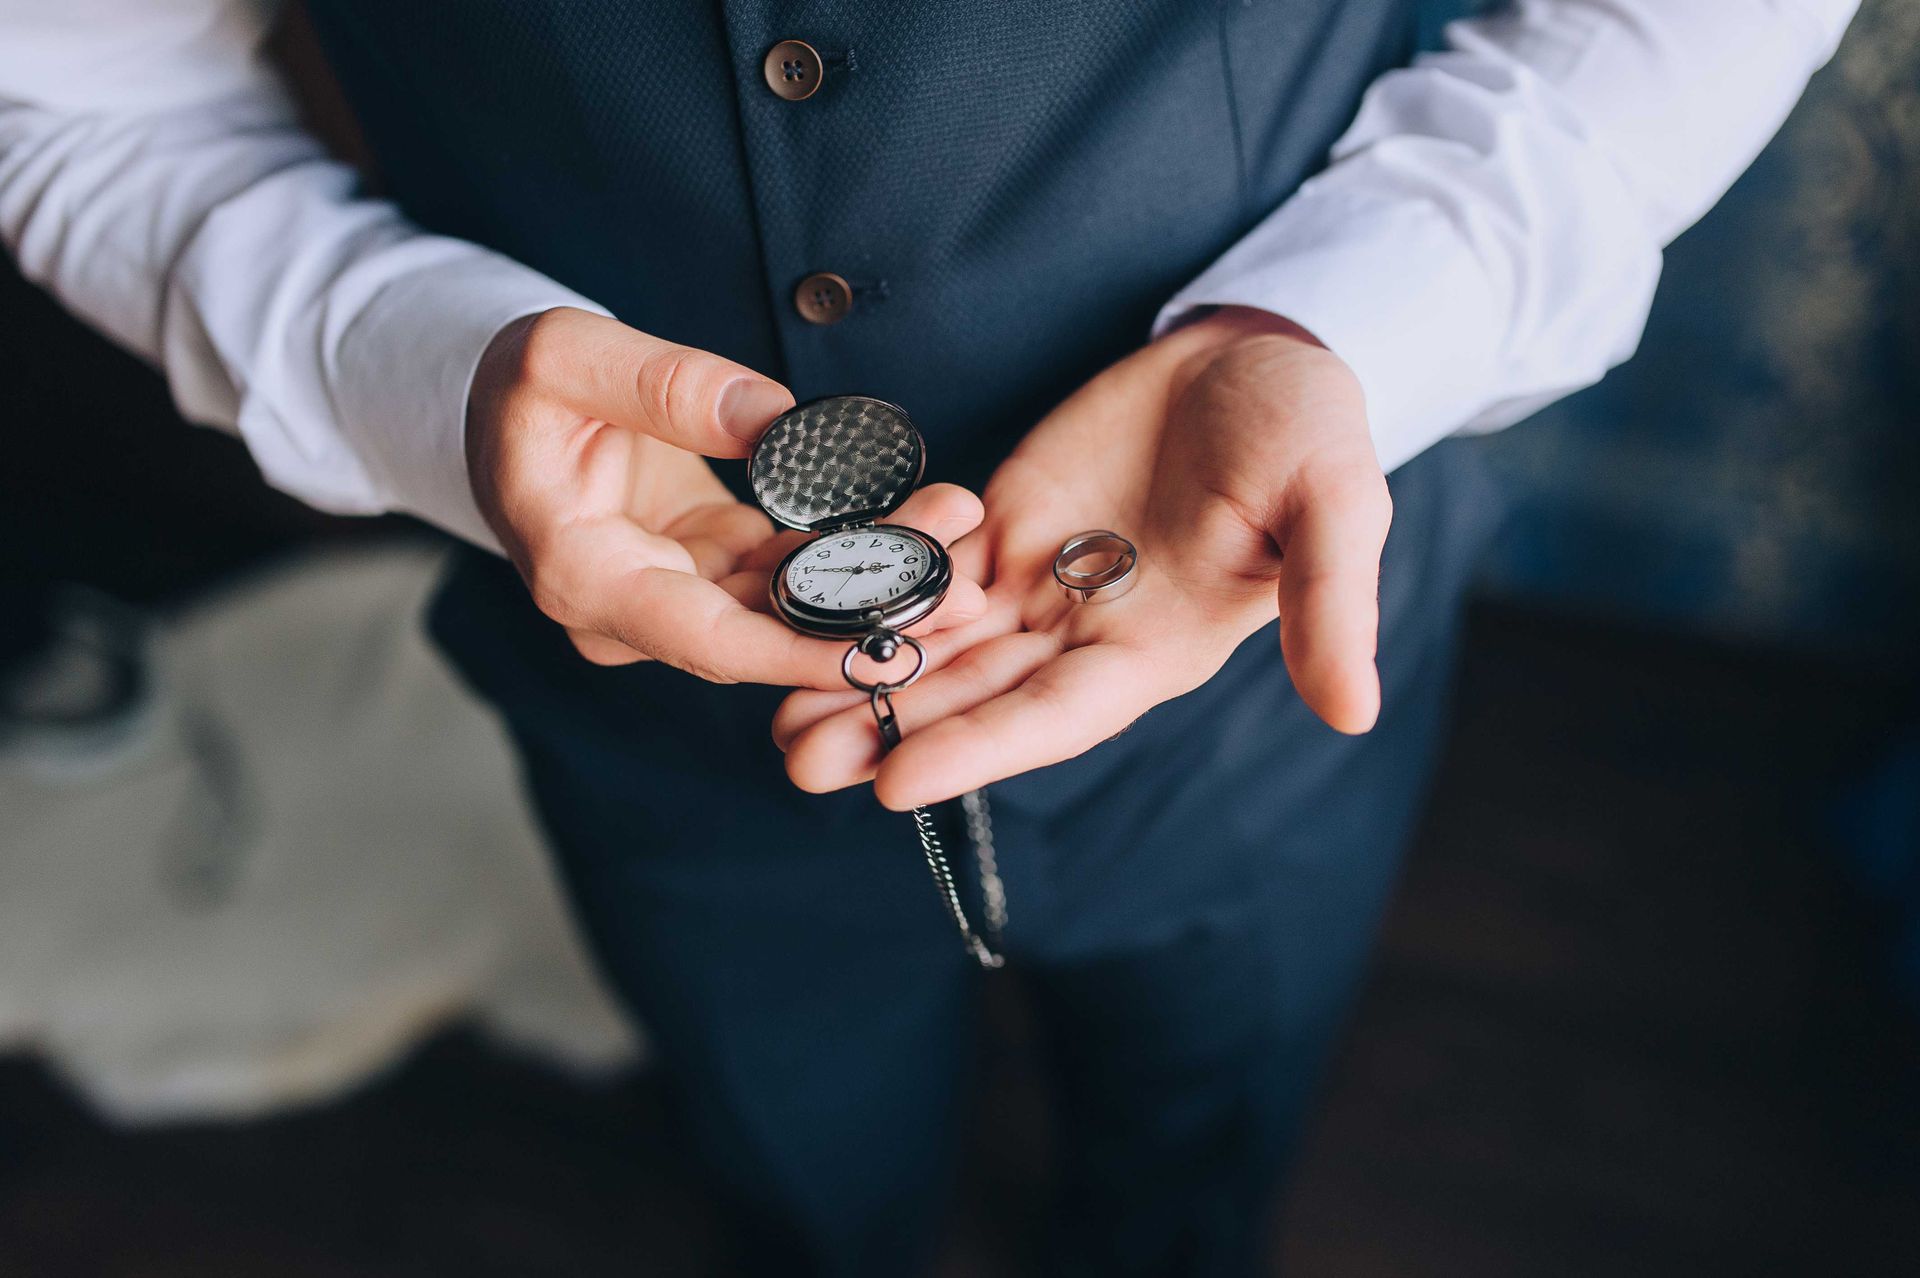 A man holding a watch in jewelry photography pic